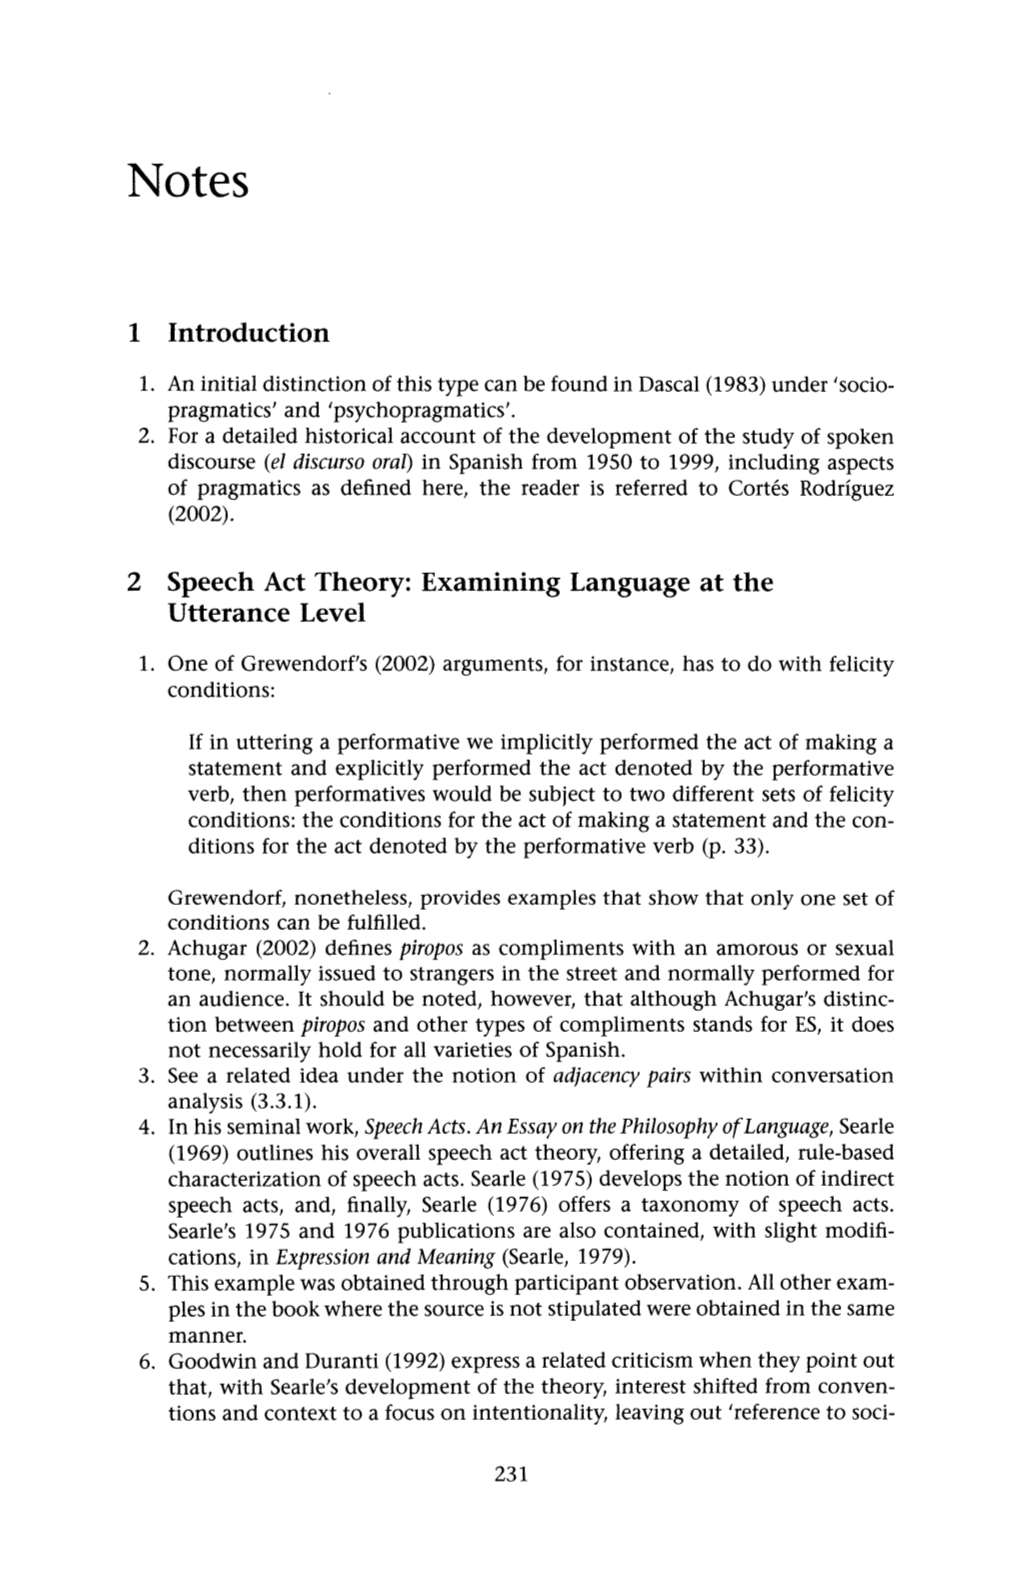 1 Introduction 2 Speech Act Theory: Examining Language at the Utterance Level